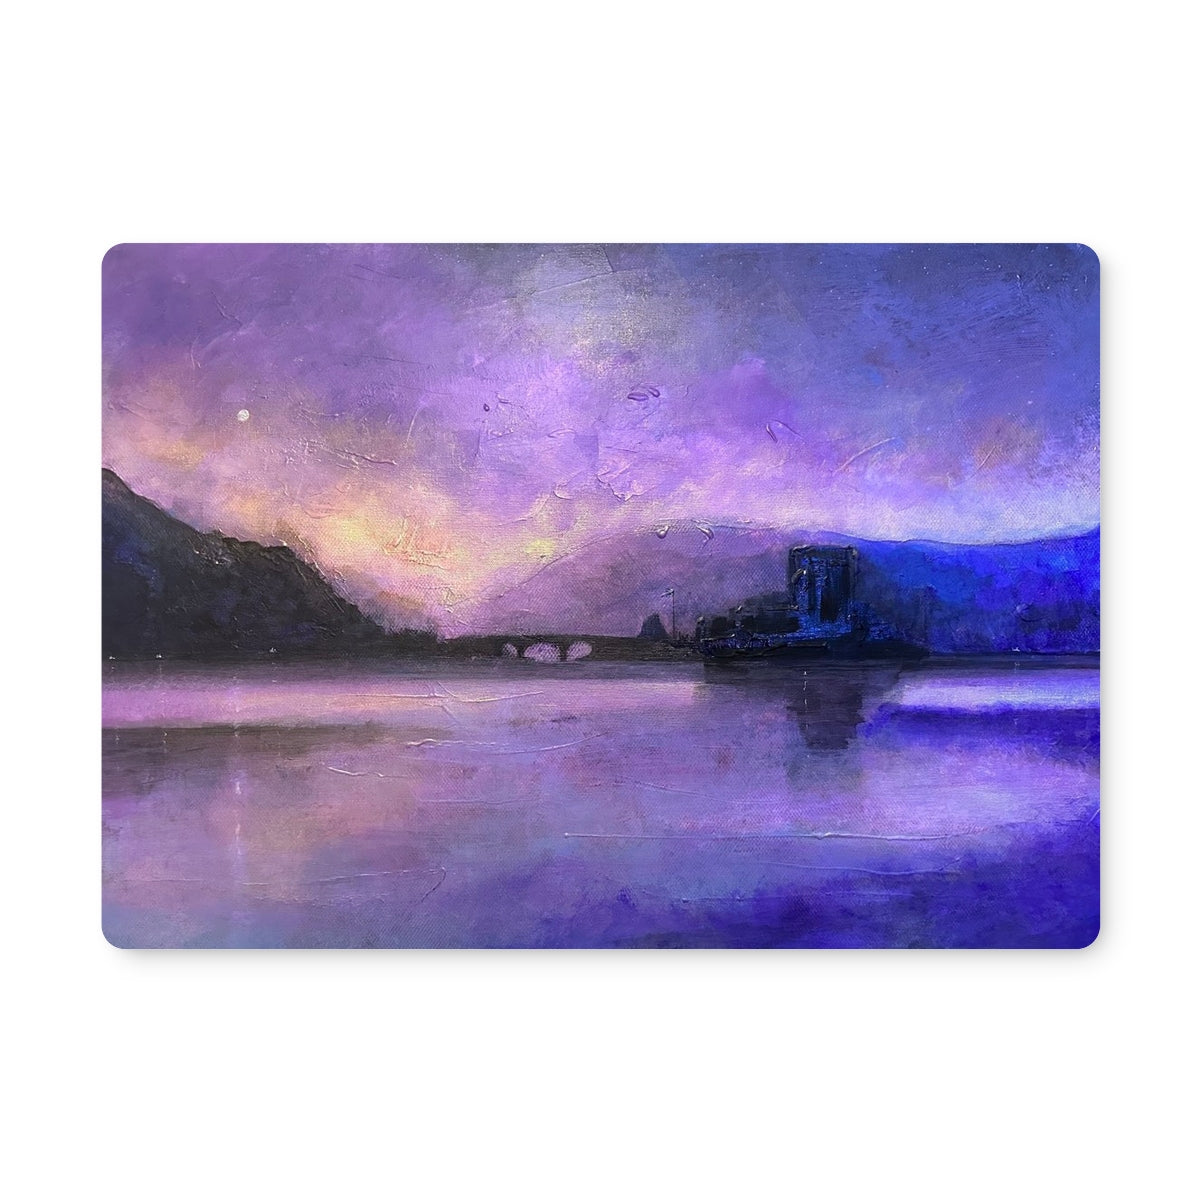 Eilean Donan Castle Moonset Art Gifts Placemat-Placemats-Historic & Iconic Scotland Art Gallery-2 Placemats-Paintings, Prints, Homeware, Art Gifts From Scotland By Scottish Artist Kevin Hunter